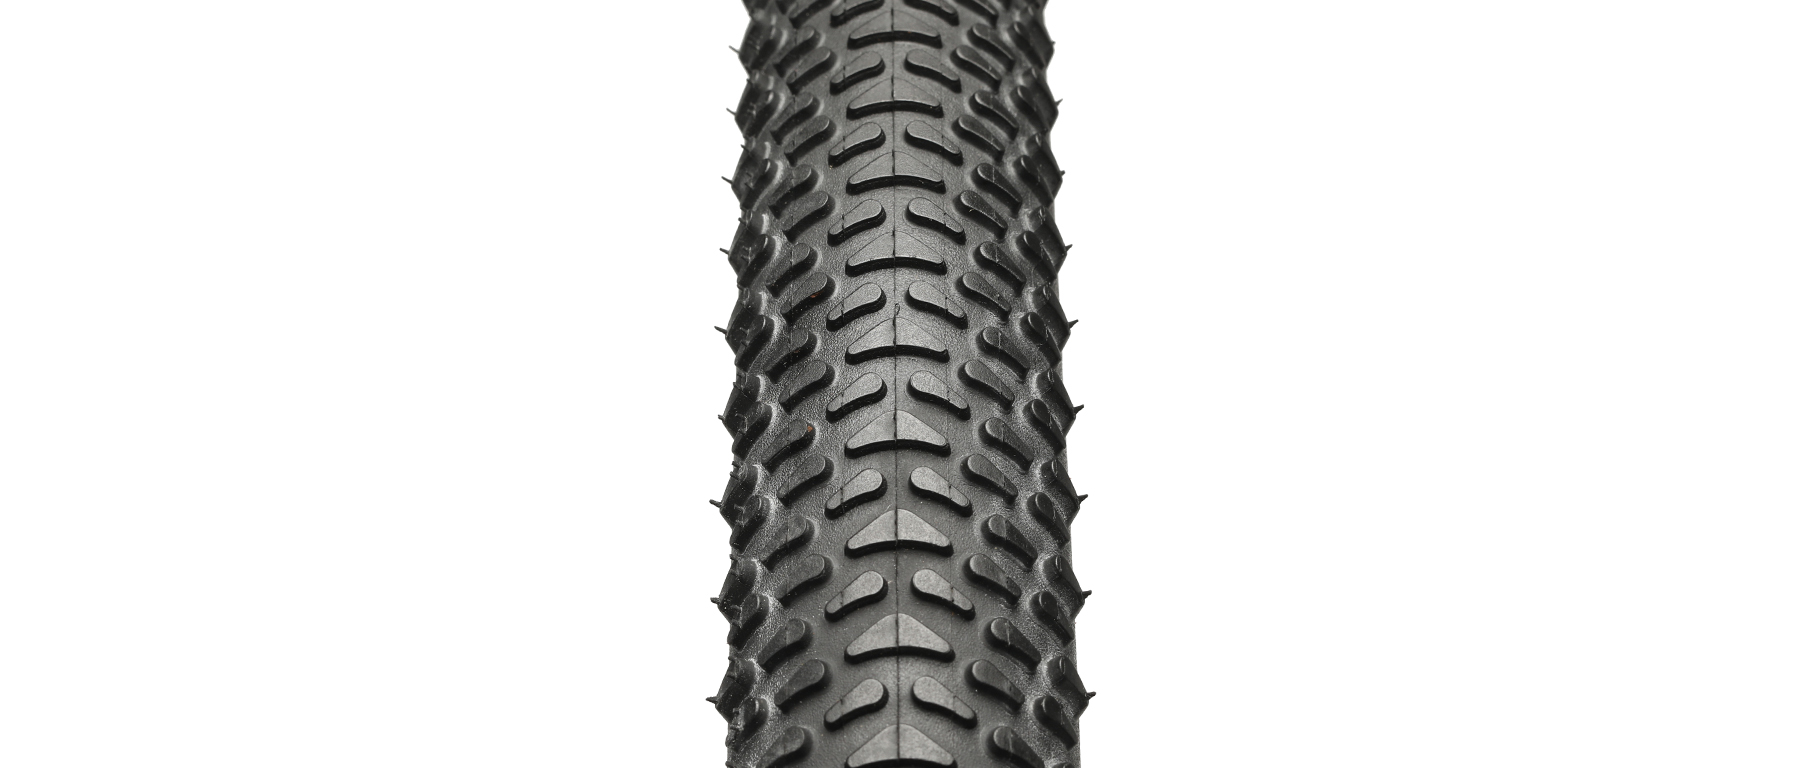 Schwalbe G-One R Tubeless Gravel Tire